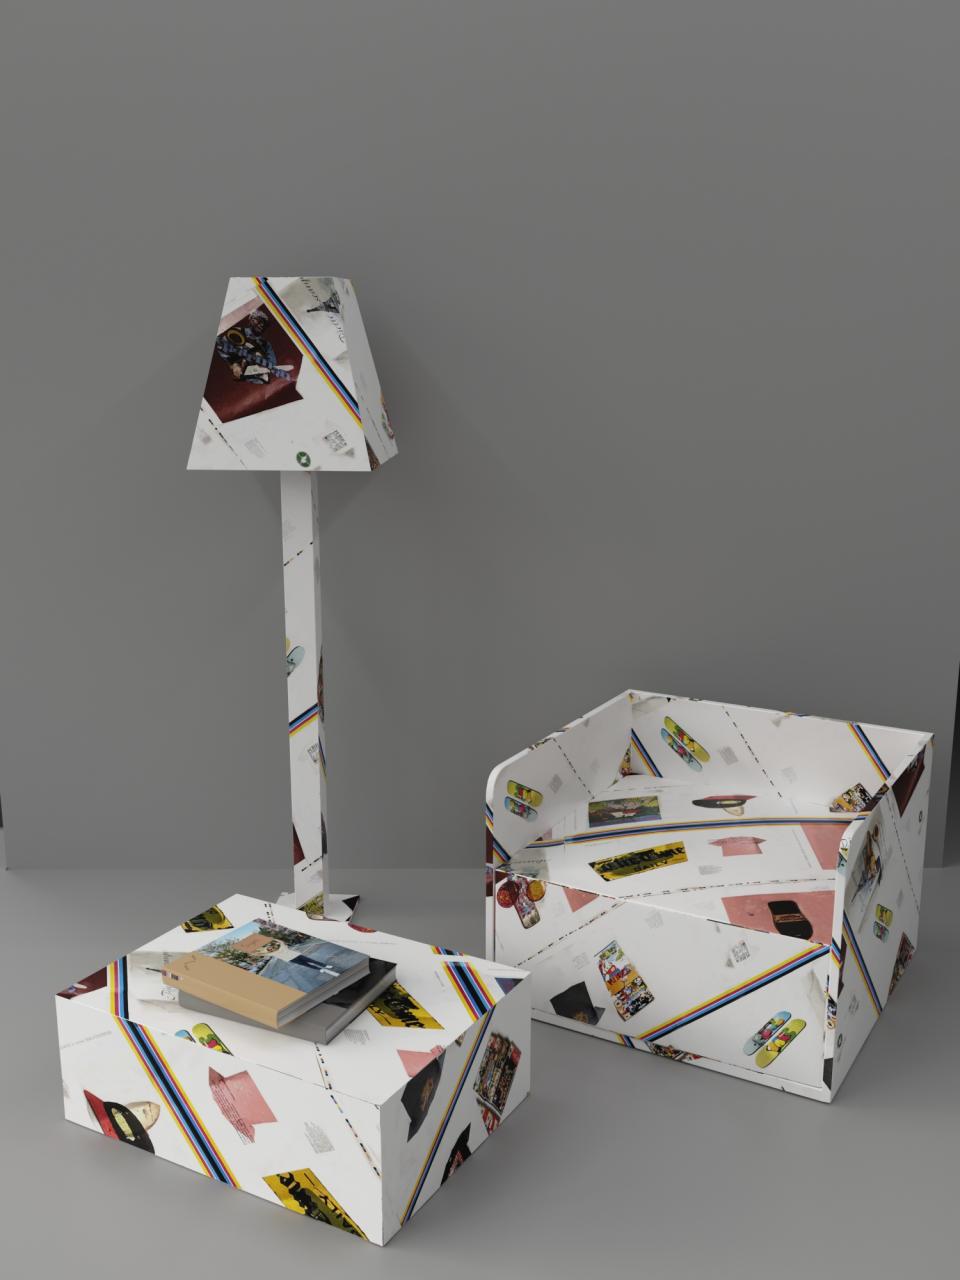 Harry Nuriev paper furniture for Sarah Andelman’s Just A Space pop-up. - Credit: Courtesy of Just An idea